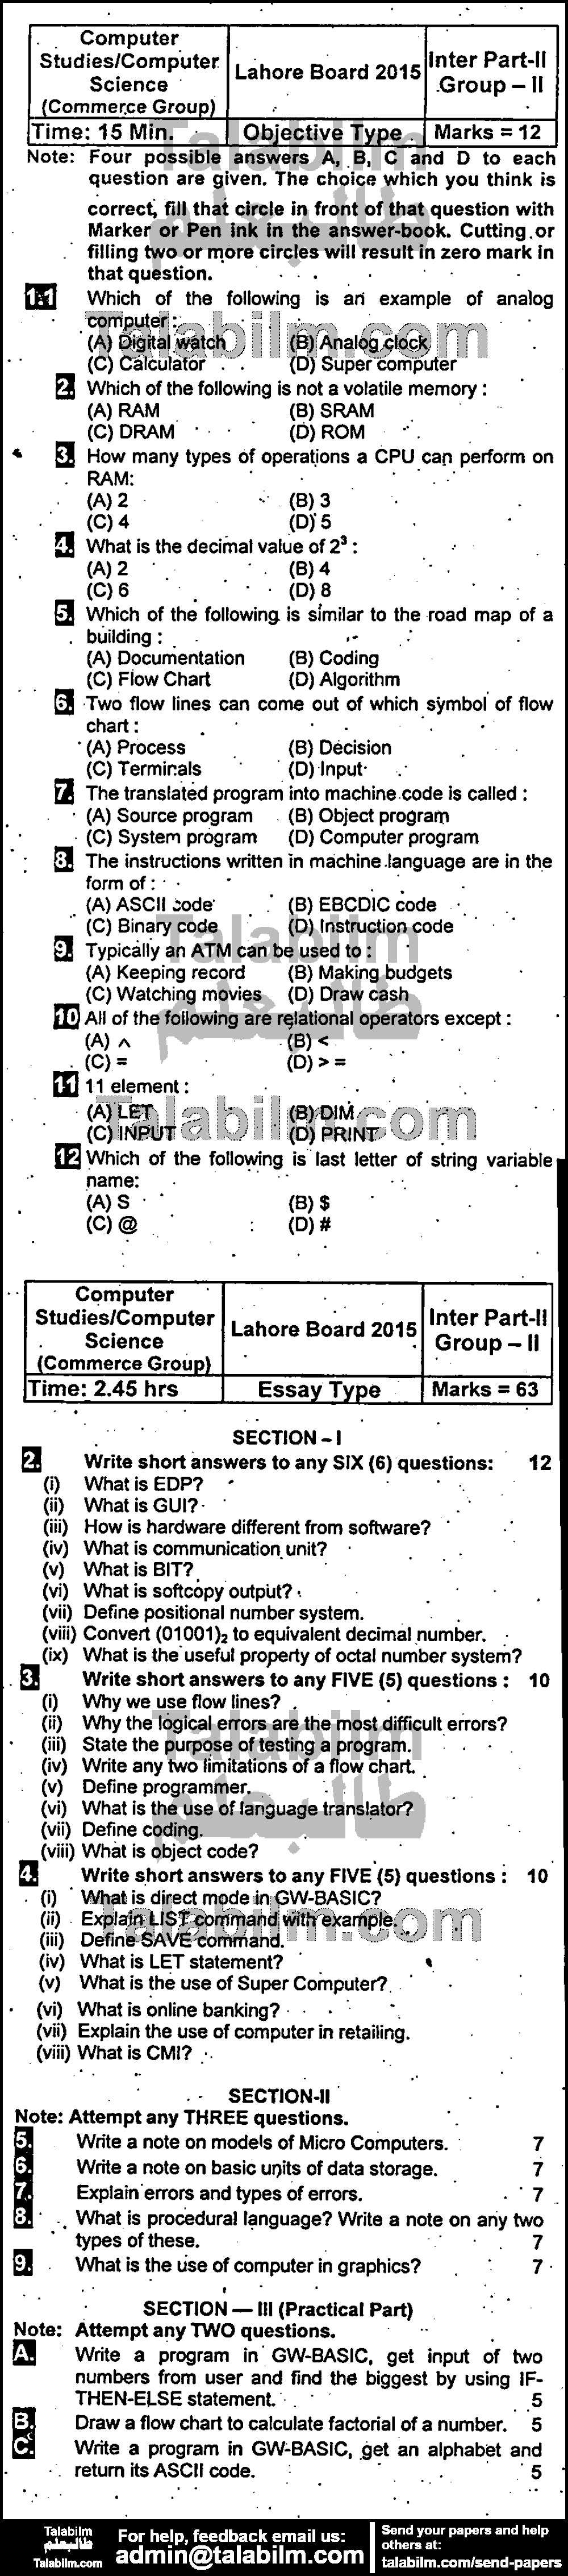 Computer Science 0 past paper for Group-II 2015